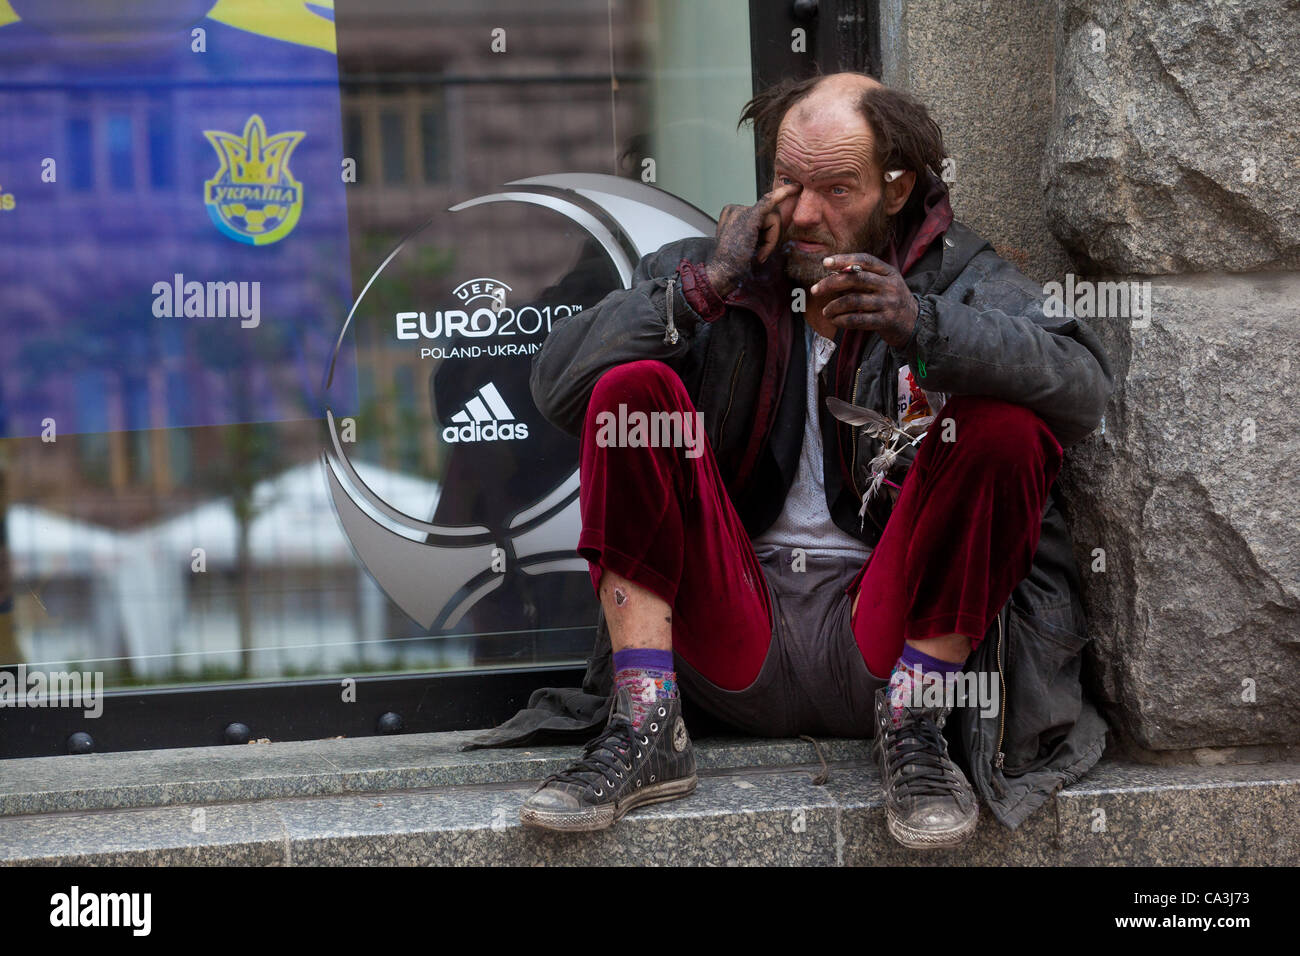 01.06.2012. Kiev, Ukraine. A homeless man sits near the front of shop windows logo EURO 2012, 1 June 2012. The Euro 2012 tournament in Poland and Ukraine runs from June 8 to July 1 Stock Photo